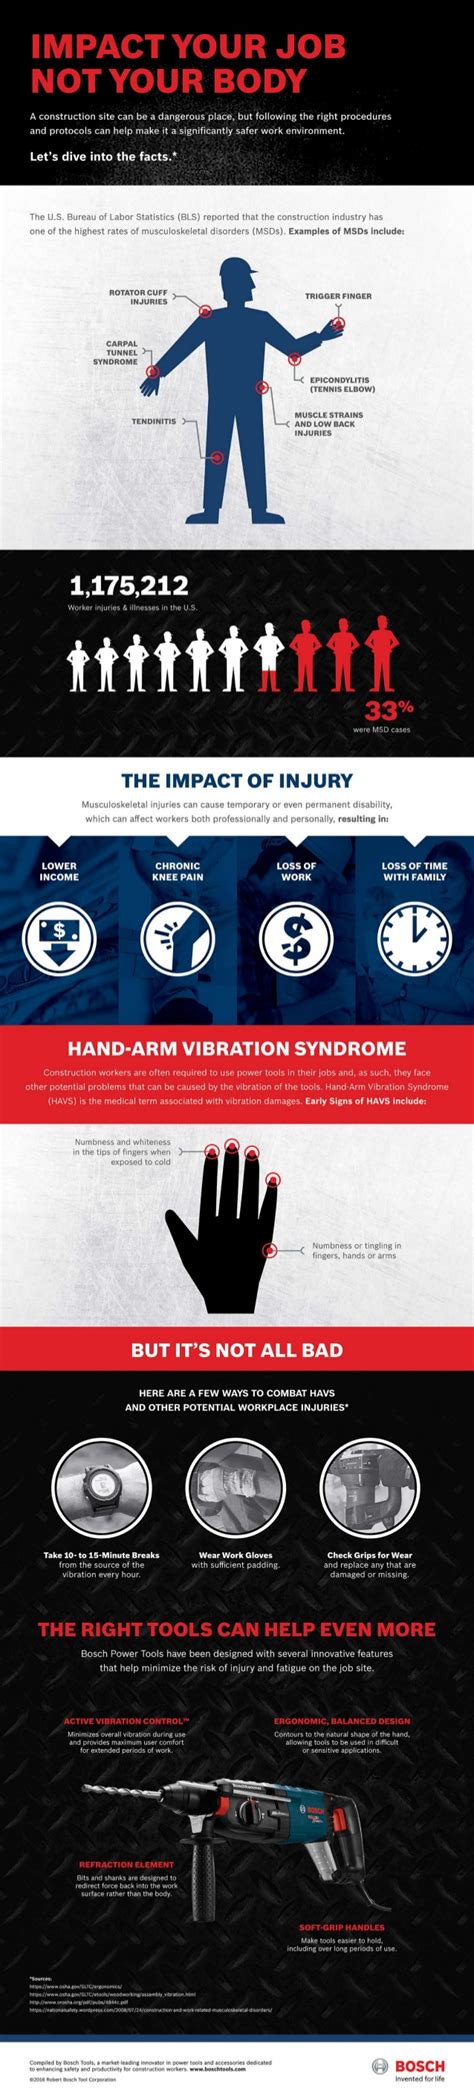 Bosch Tools Infographic On Construction Worker Ergonomics Related